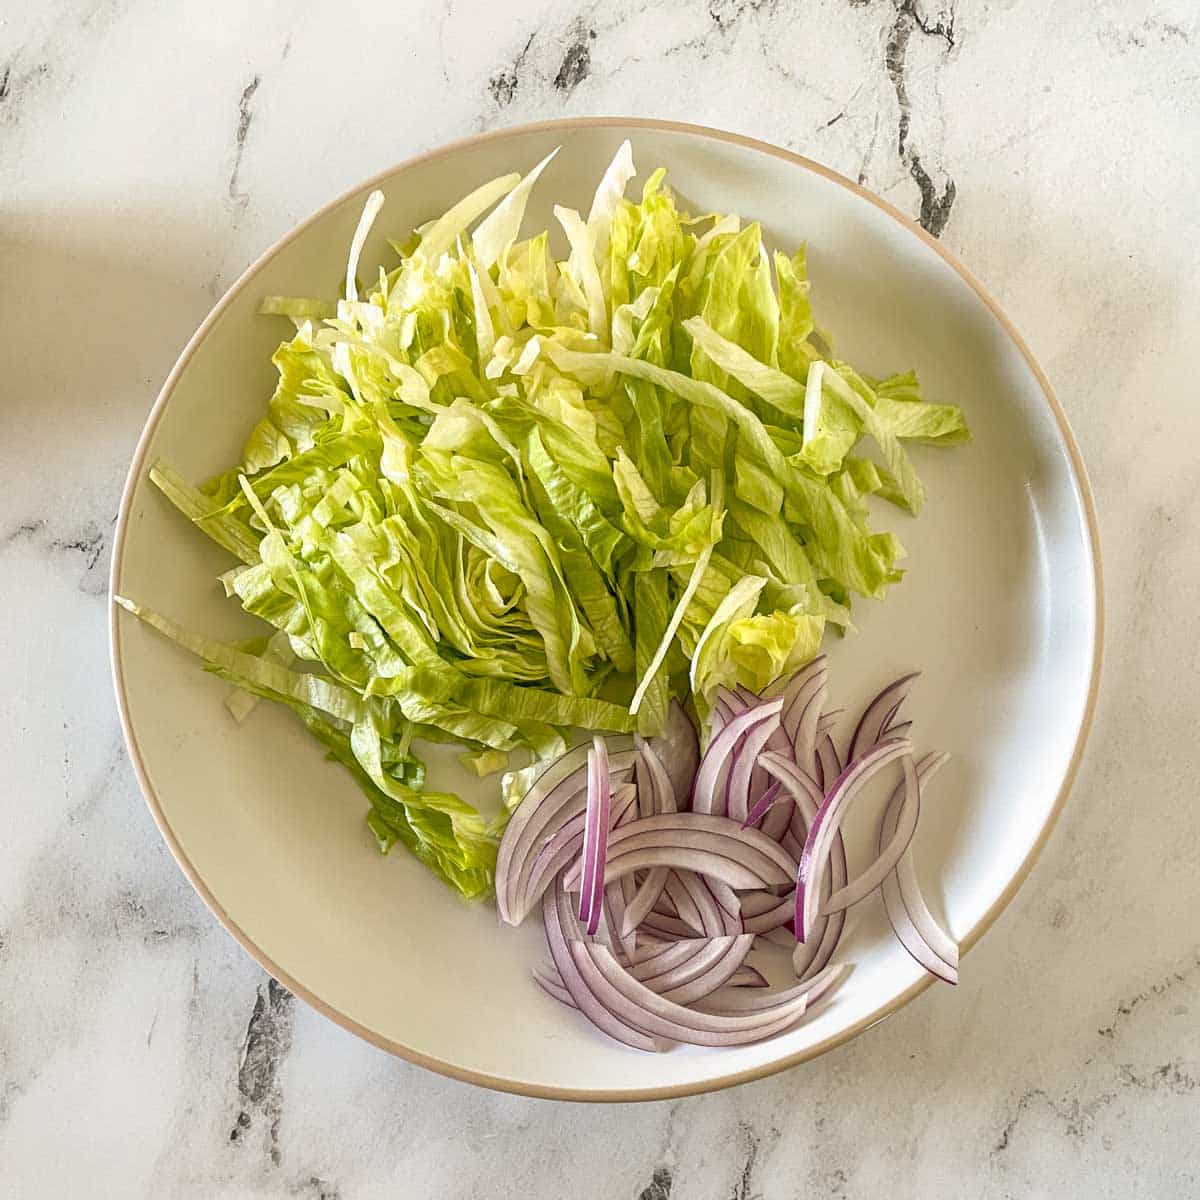 Shredded lettuce and sliced onion is shown on a white plate.